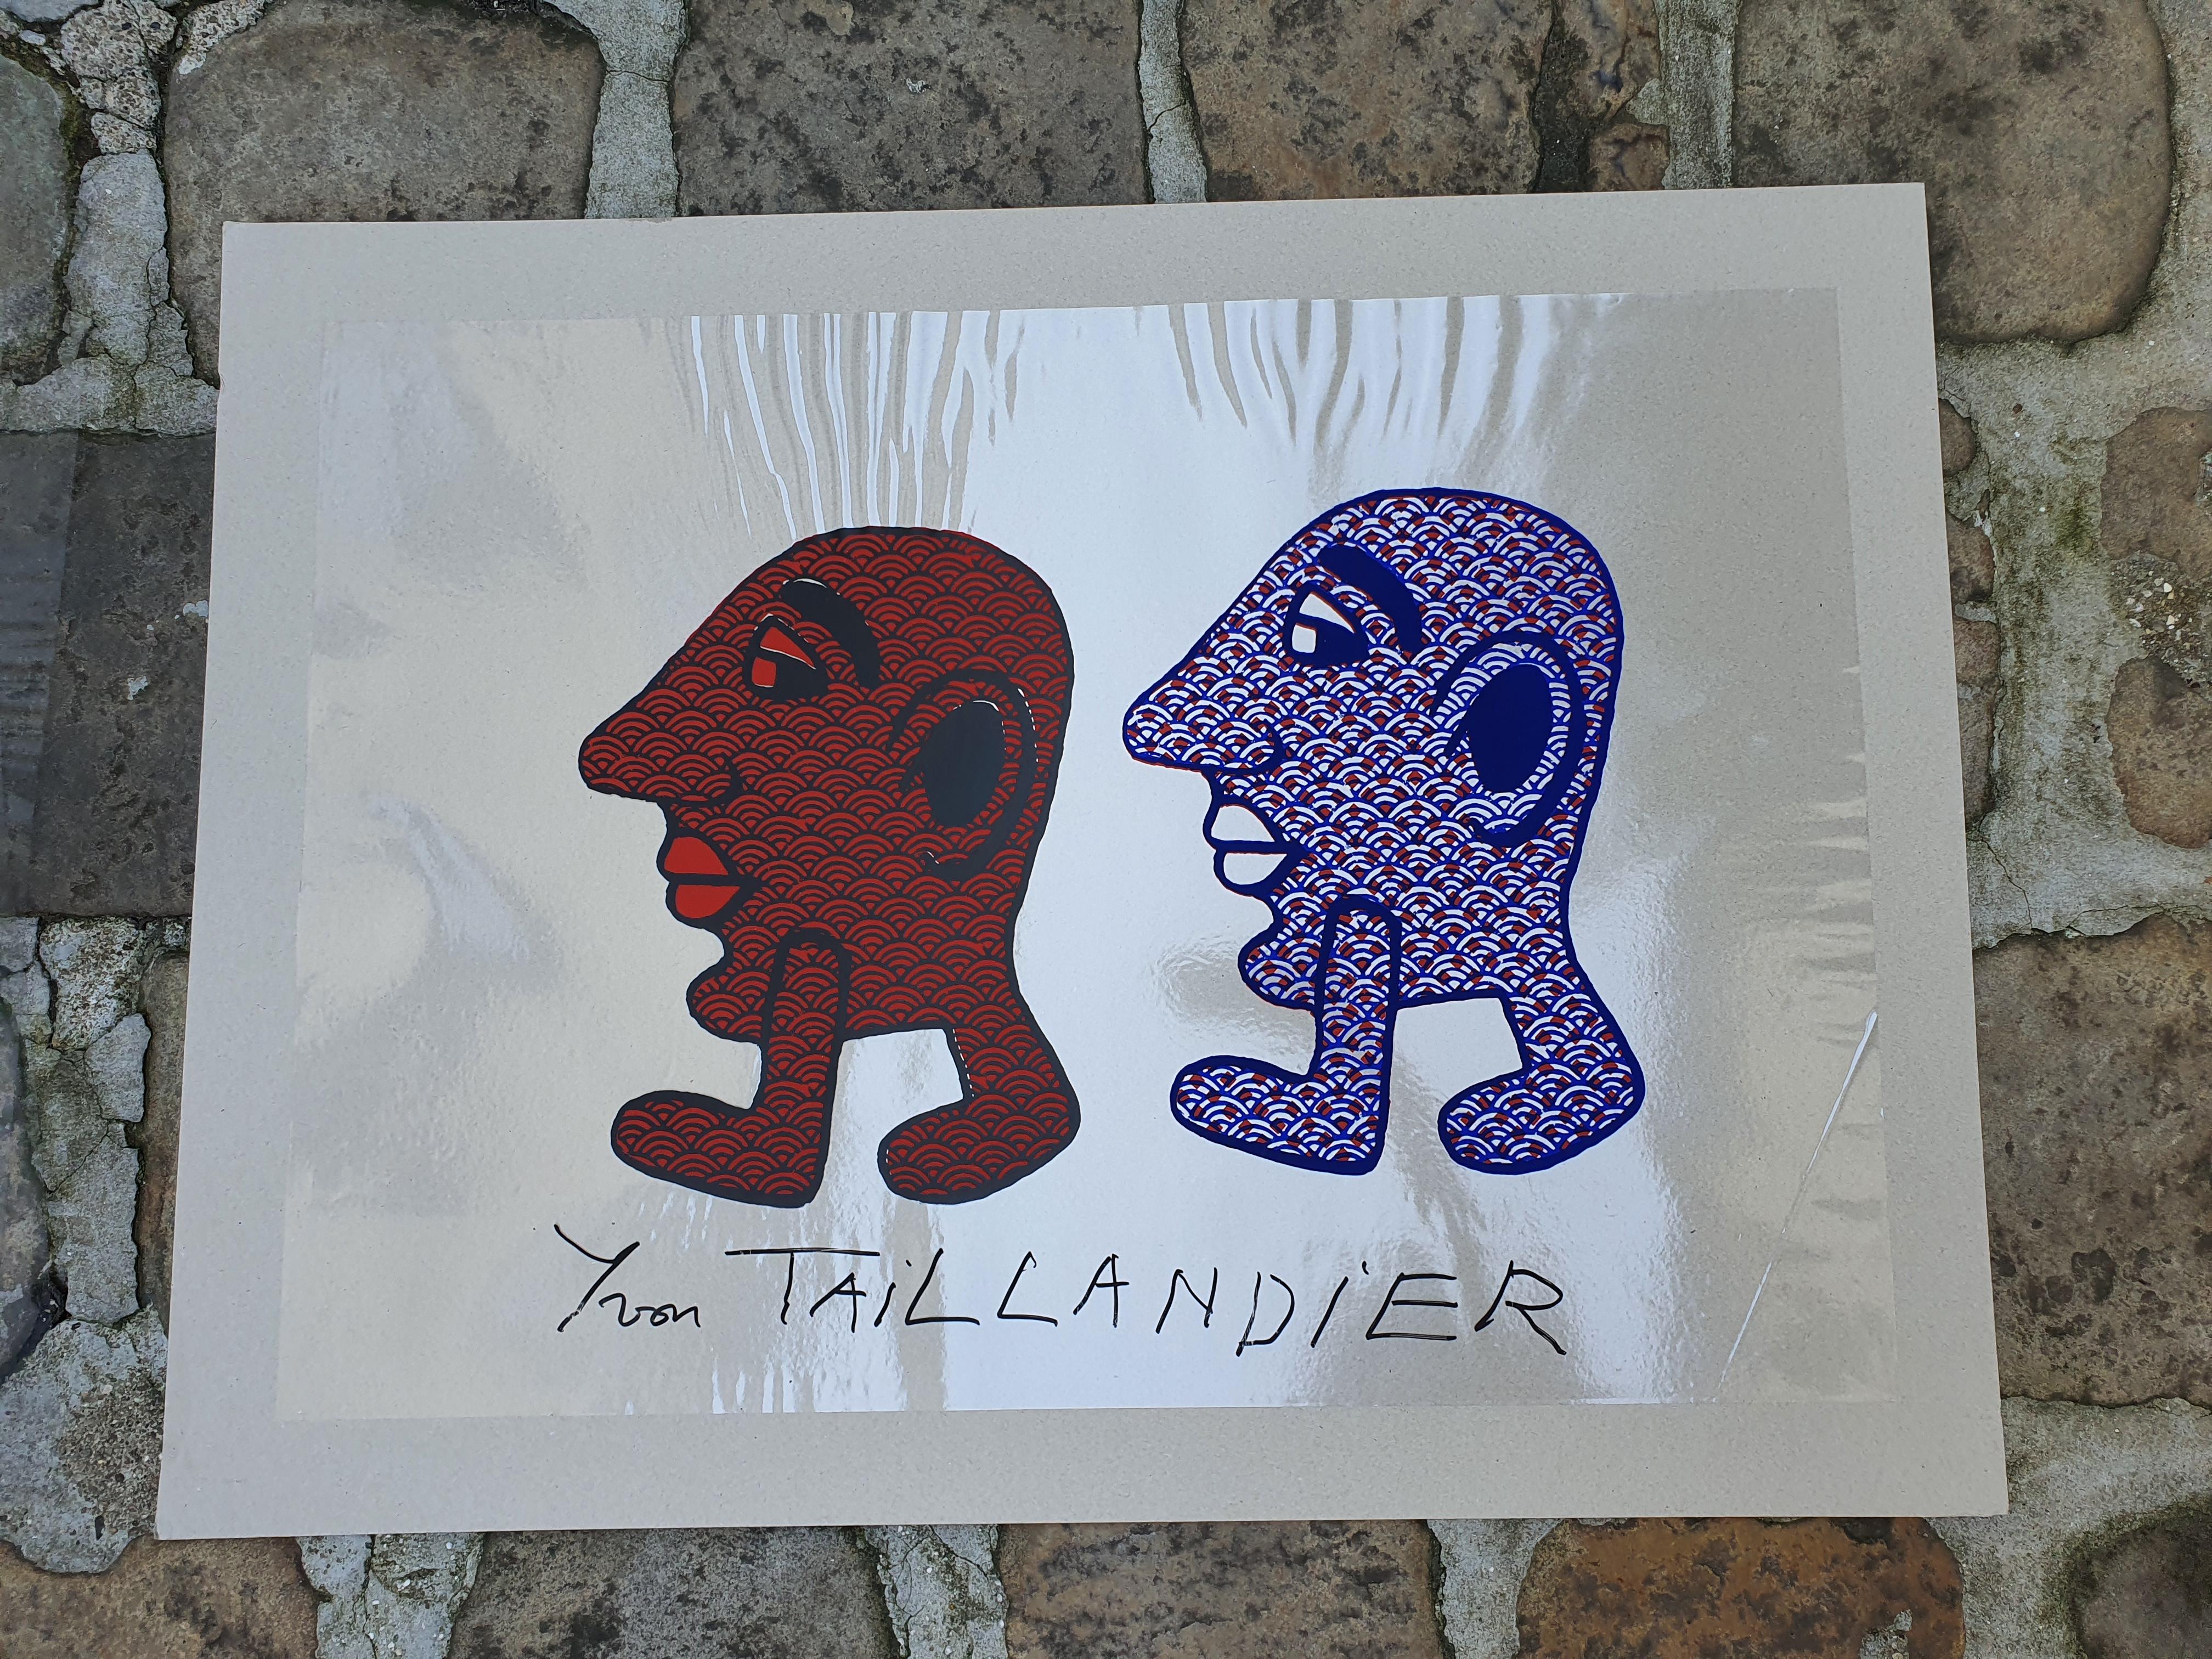 Magnificent original and unique work by Yvon Taillandier _ 2015
his emblematic character that he calls 